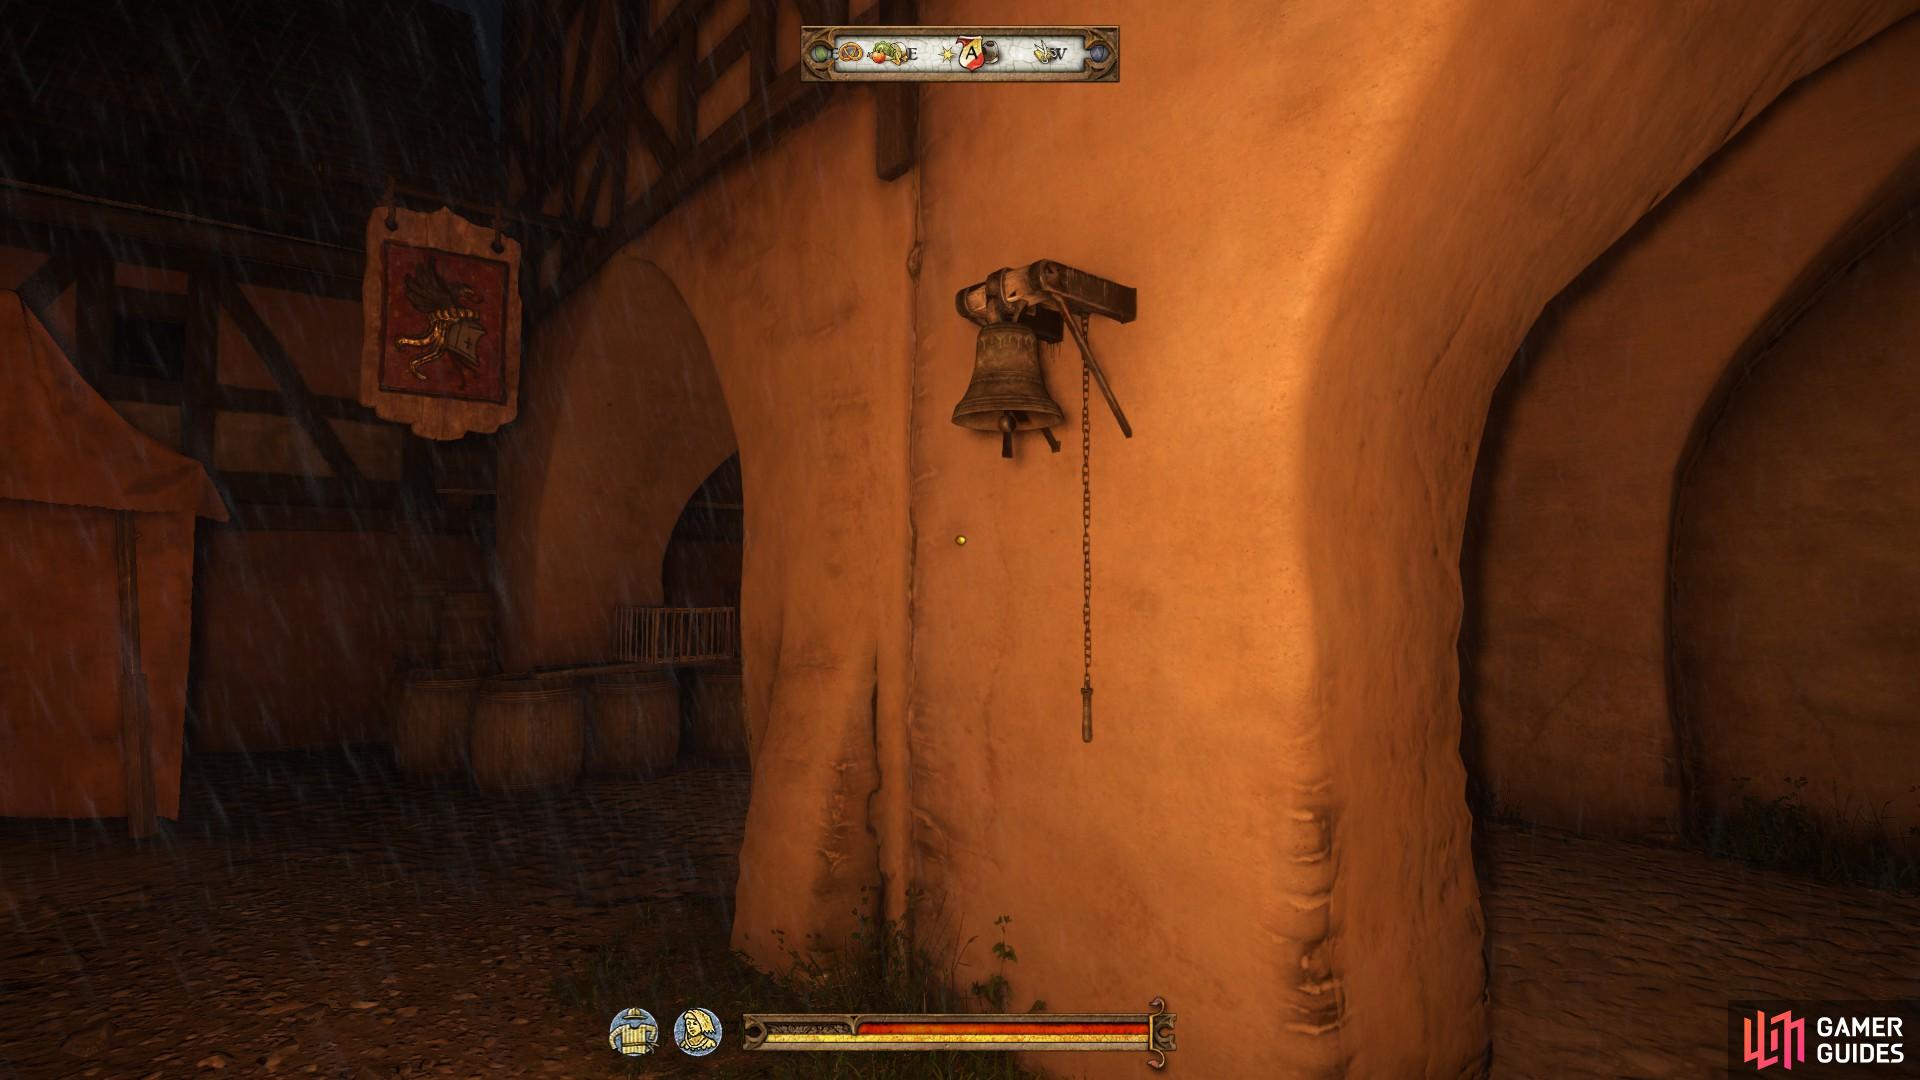 Ring the bell by the Rathaus to signify the ending of the day. It is located on the wall just outside the Armourer shop.